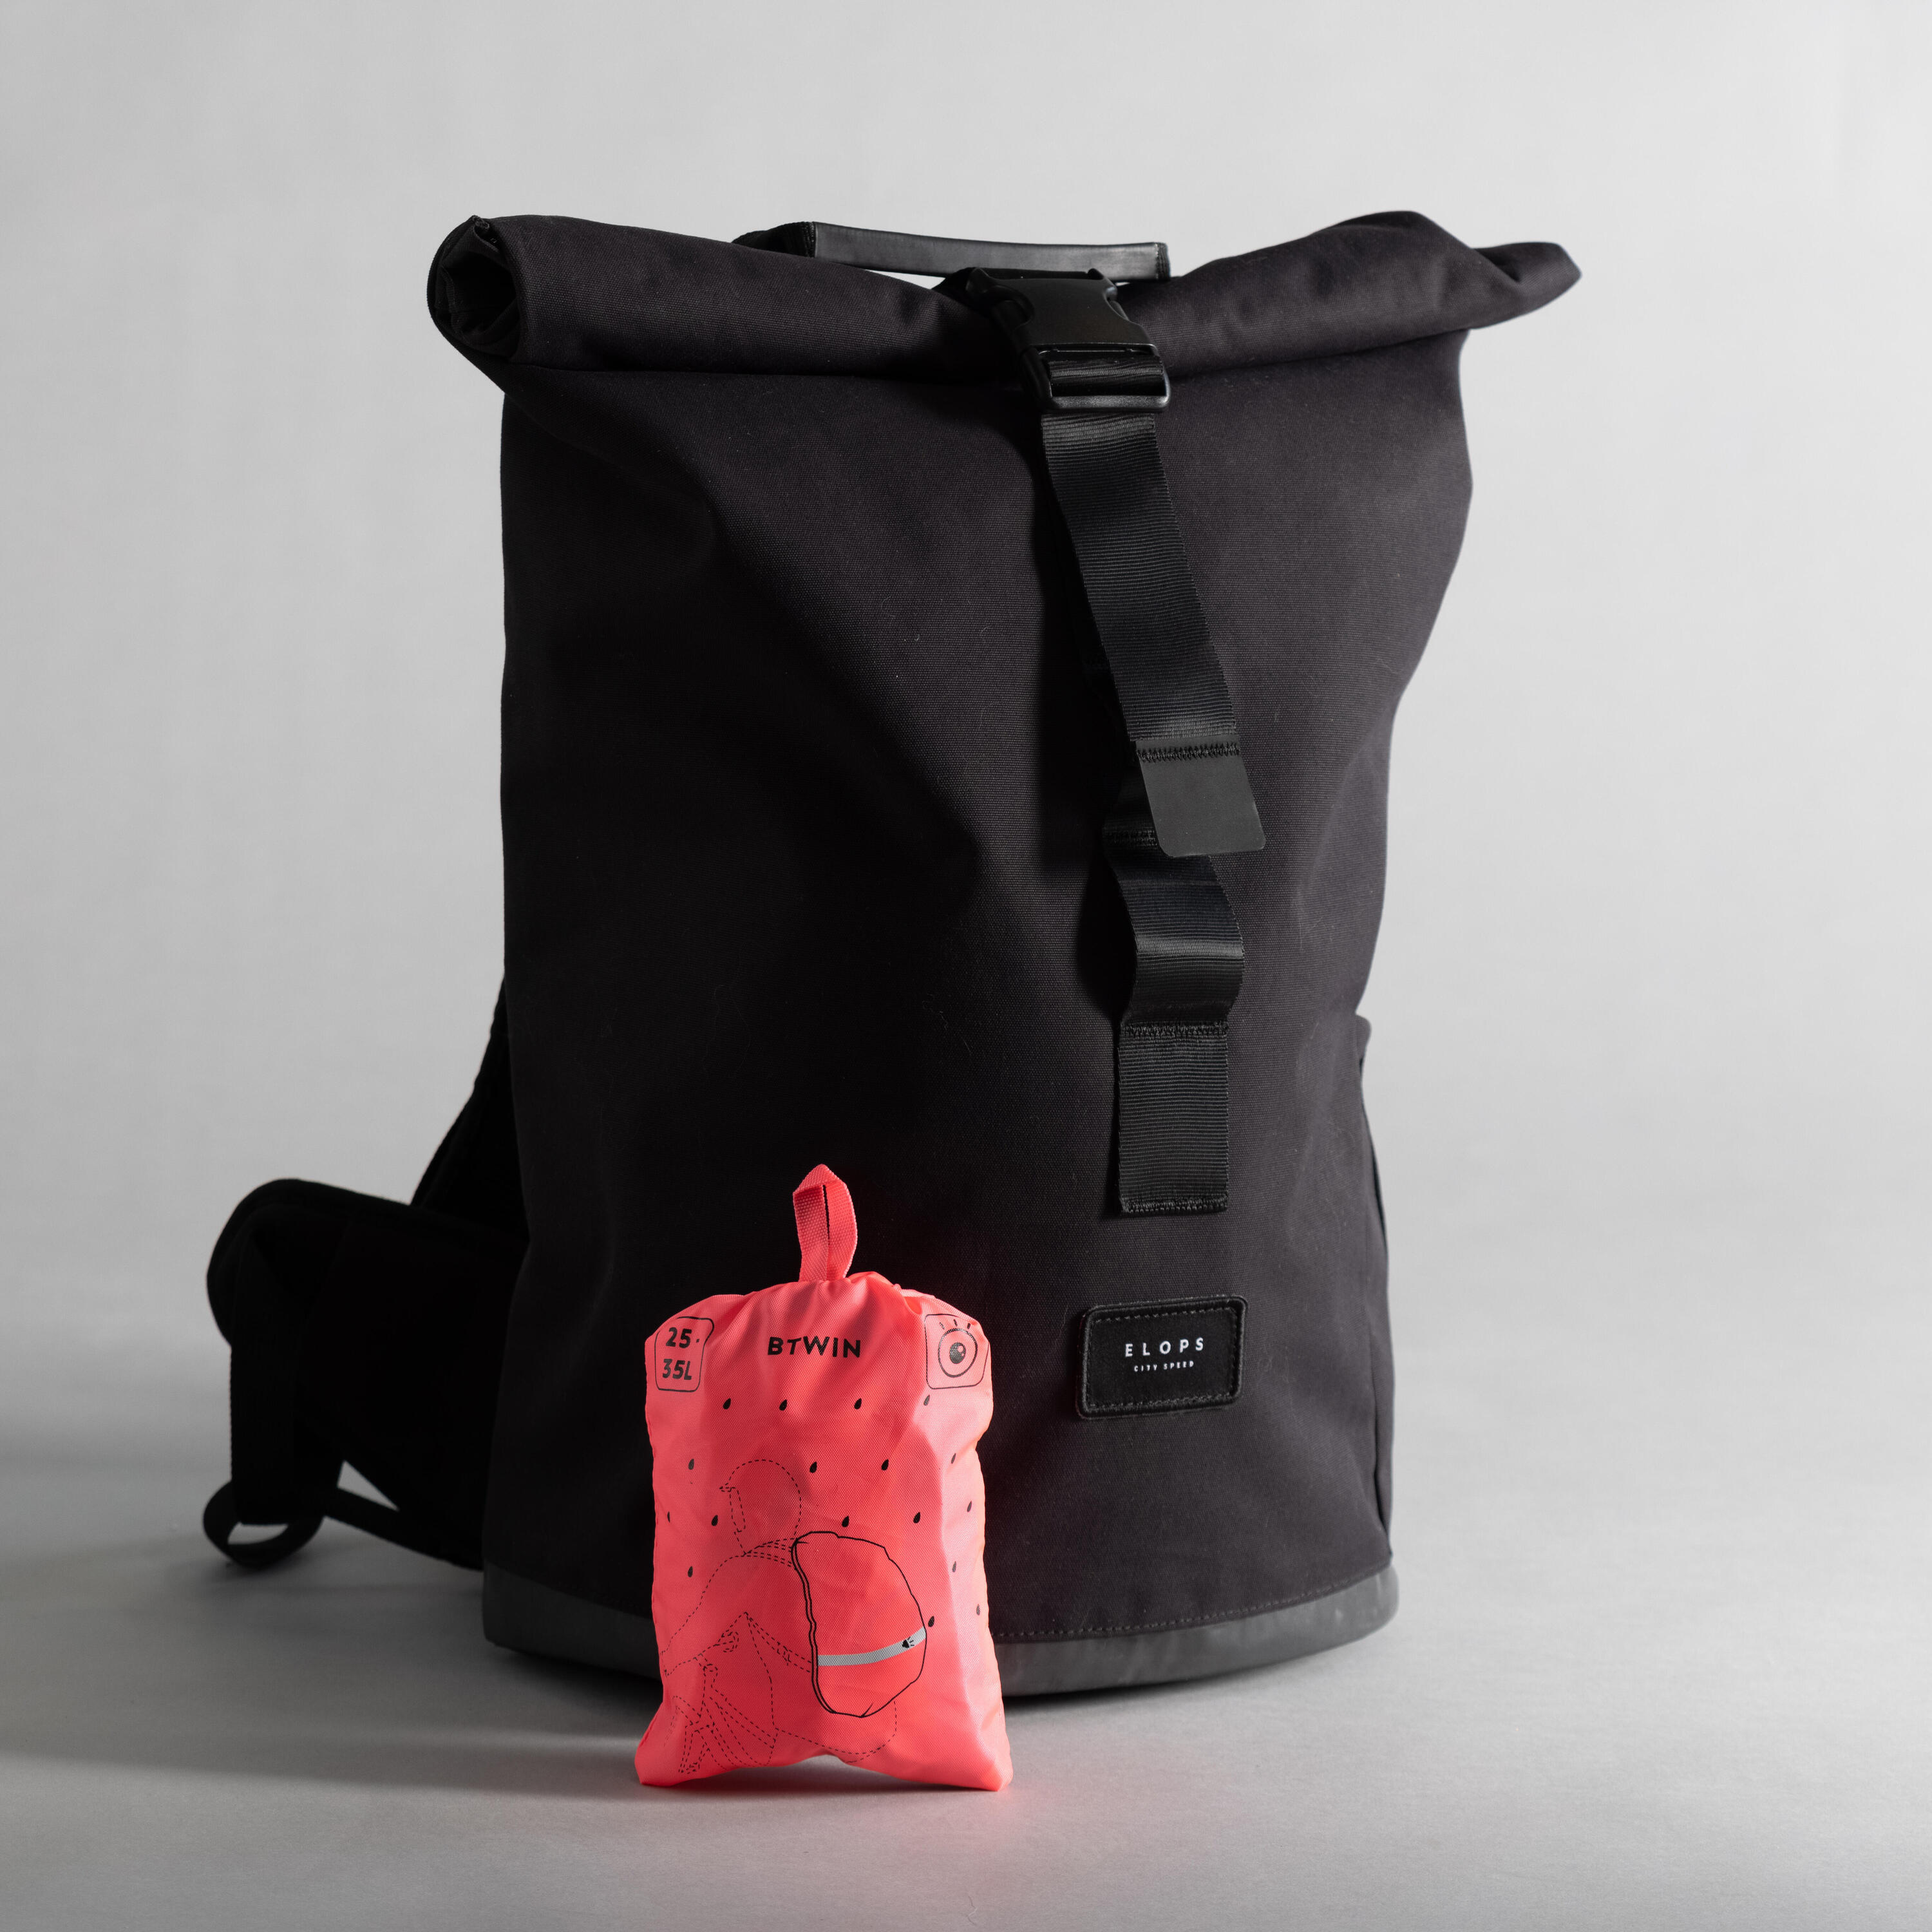 Waterproof Day/Night Visibility Bag Cover - Neon Pink 2/8